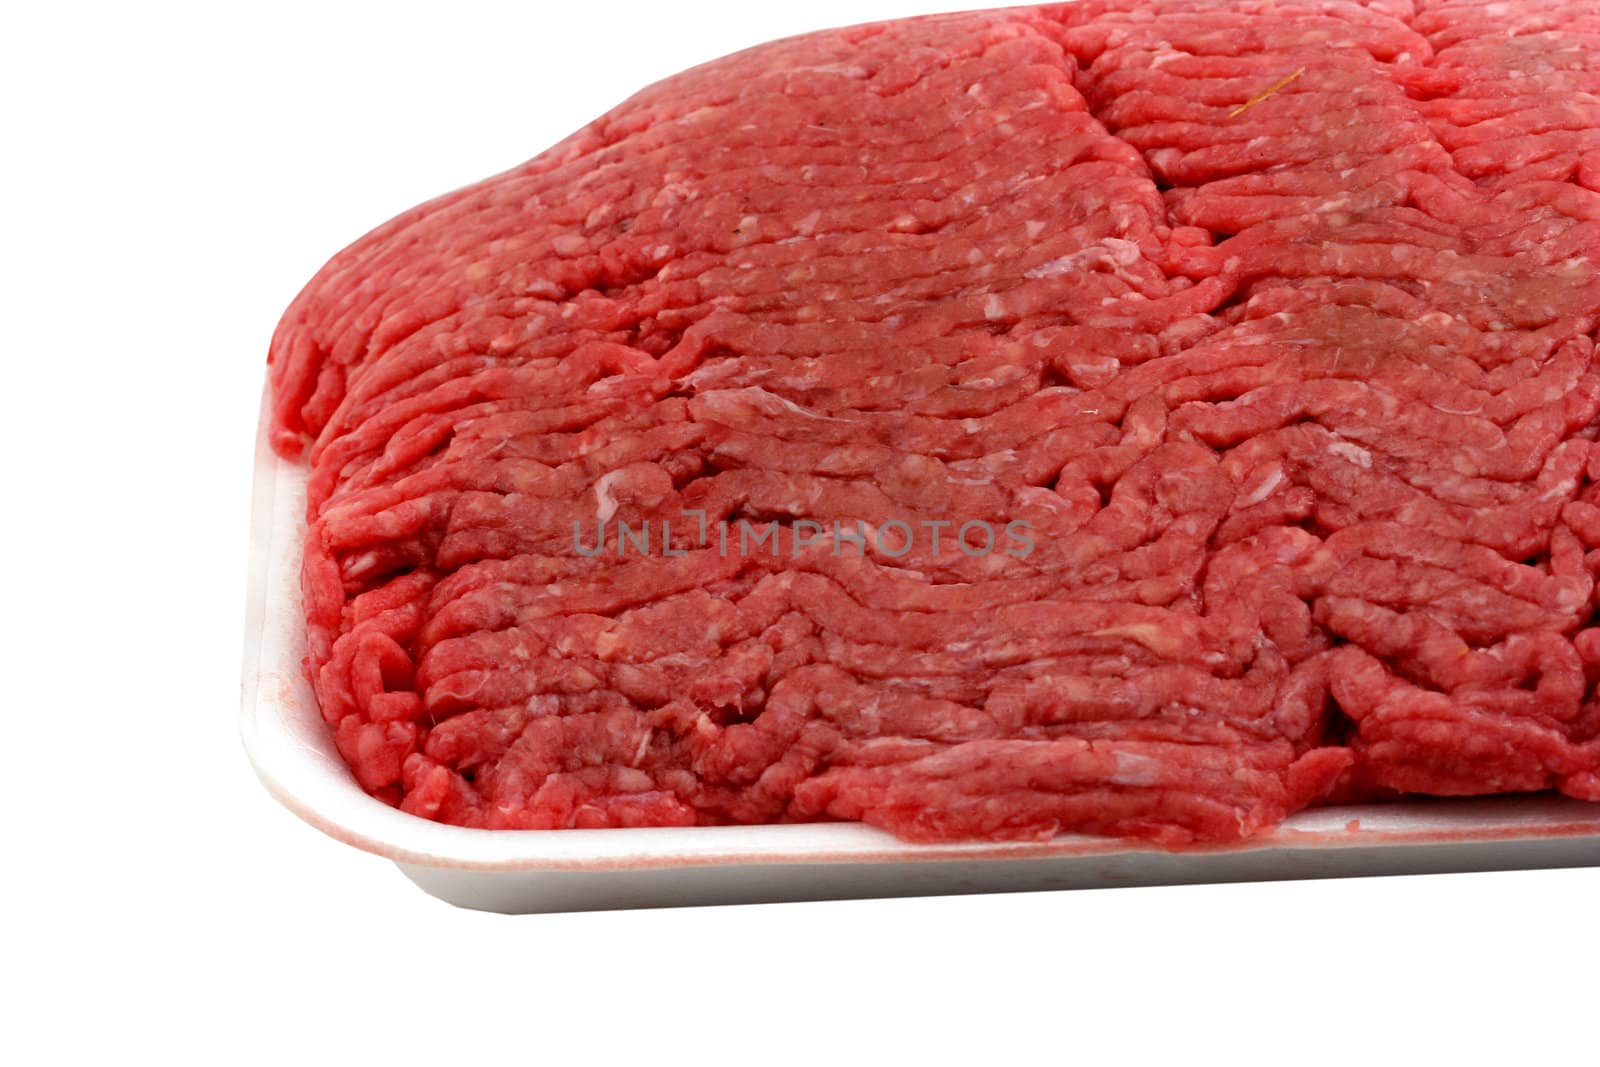 A ground beef on foam packaging